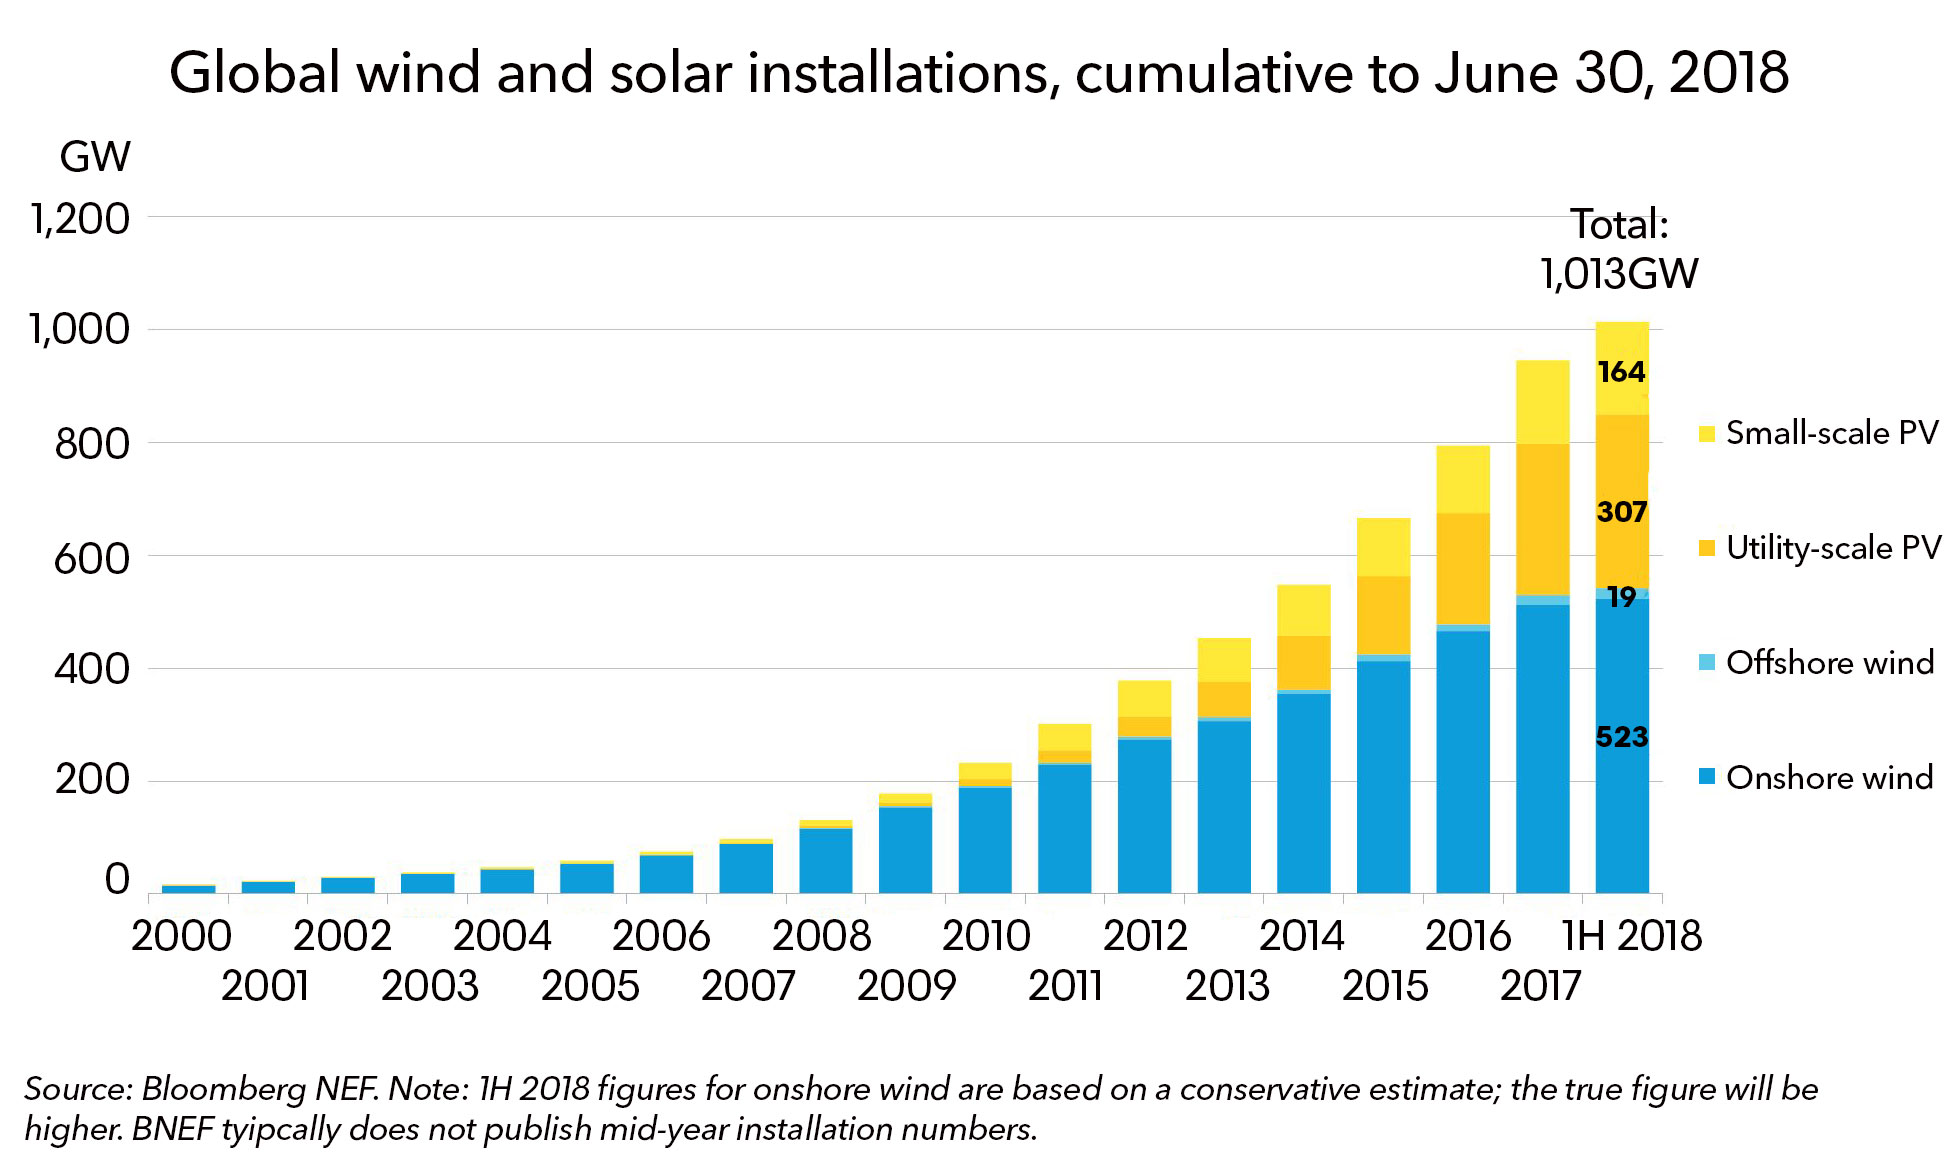 World Reaches 1,000GW of Wind and Solar, Keeps Going BloombergNEF